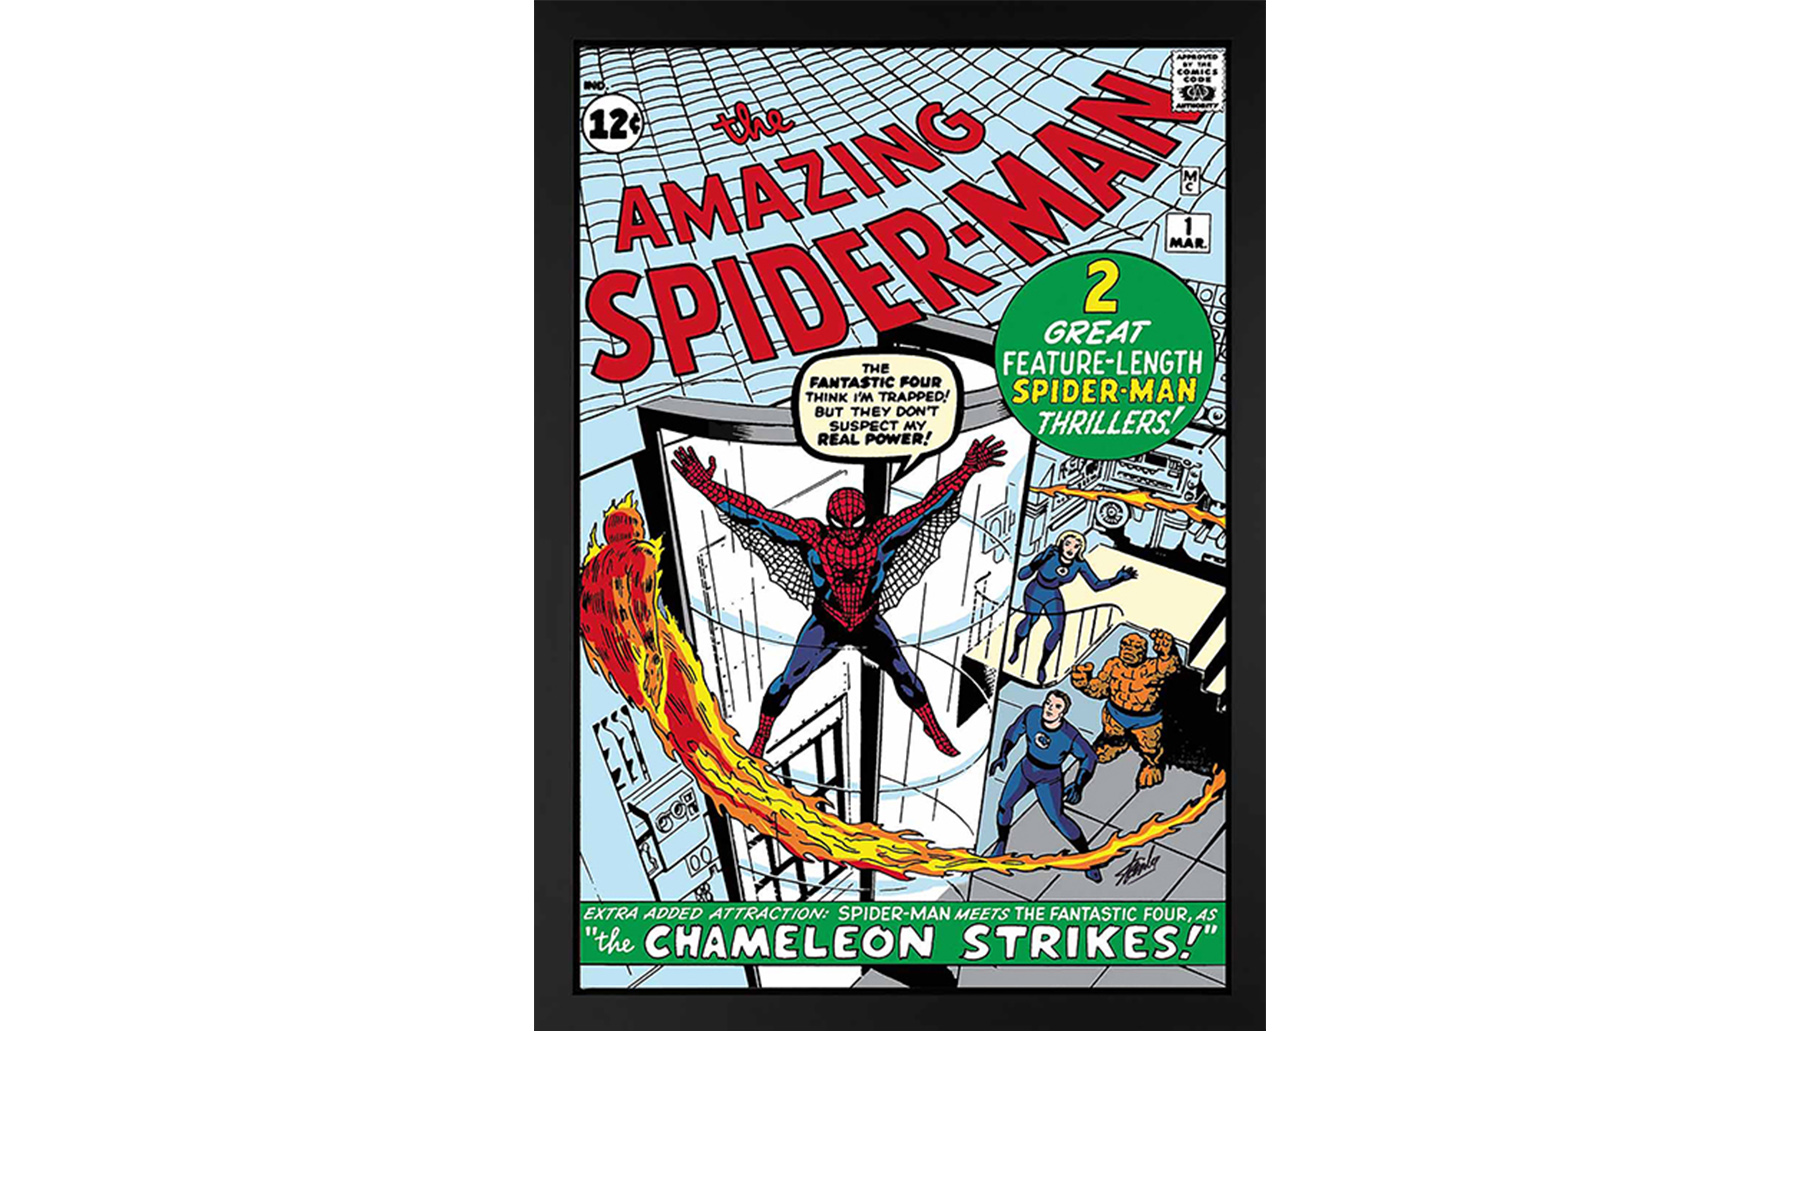 The Amazing Spider-Man: Spider-Man Meets the Fantastic Four. Signed by Stan Lee